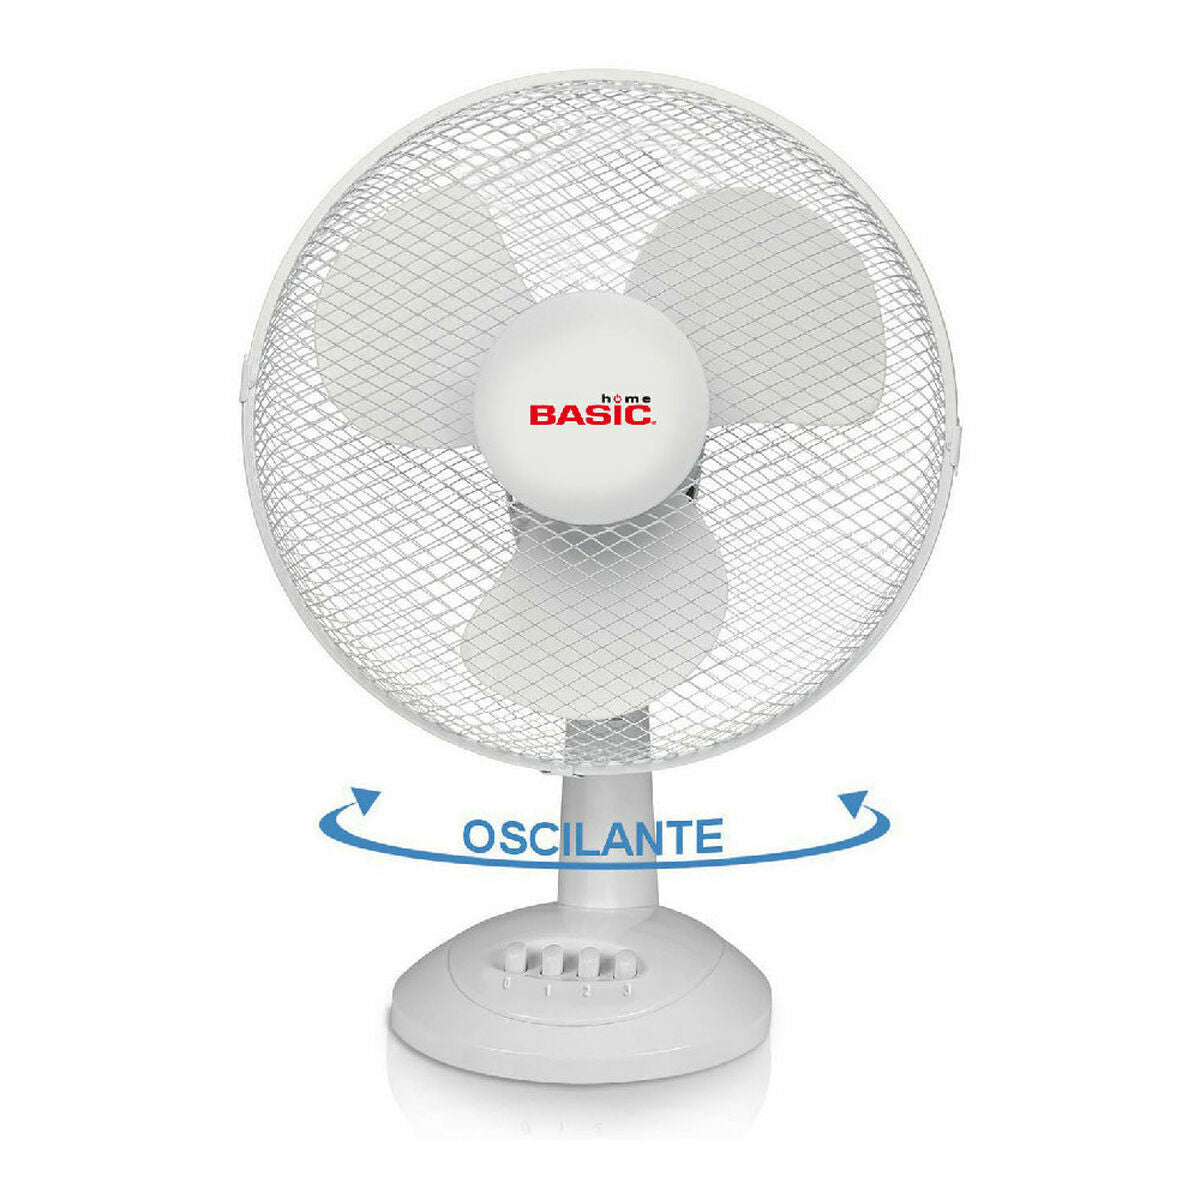 Table Fan Basic Home White 35 W 30 cm (2 Units), Basic Home, Home and cooking, Portable air conditioning, table-fan-basic-home-white-35-w-30-cm-2-units, Brand_Basic Home, category-reference-2399, category-reference-2450, category-reference-2451, category-reference-t-19656, category-reference-t-21087, category-reference-t-25217, category-reference-t-29129, Condition_NEW, ferretería, Price_50 - 100, summer, RiotNook